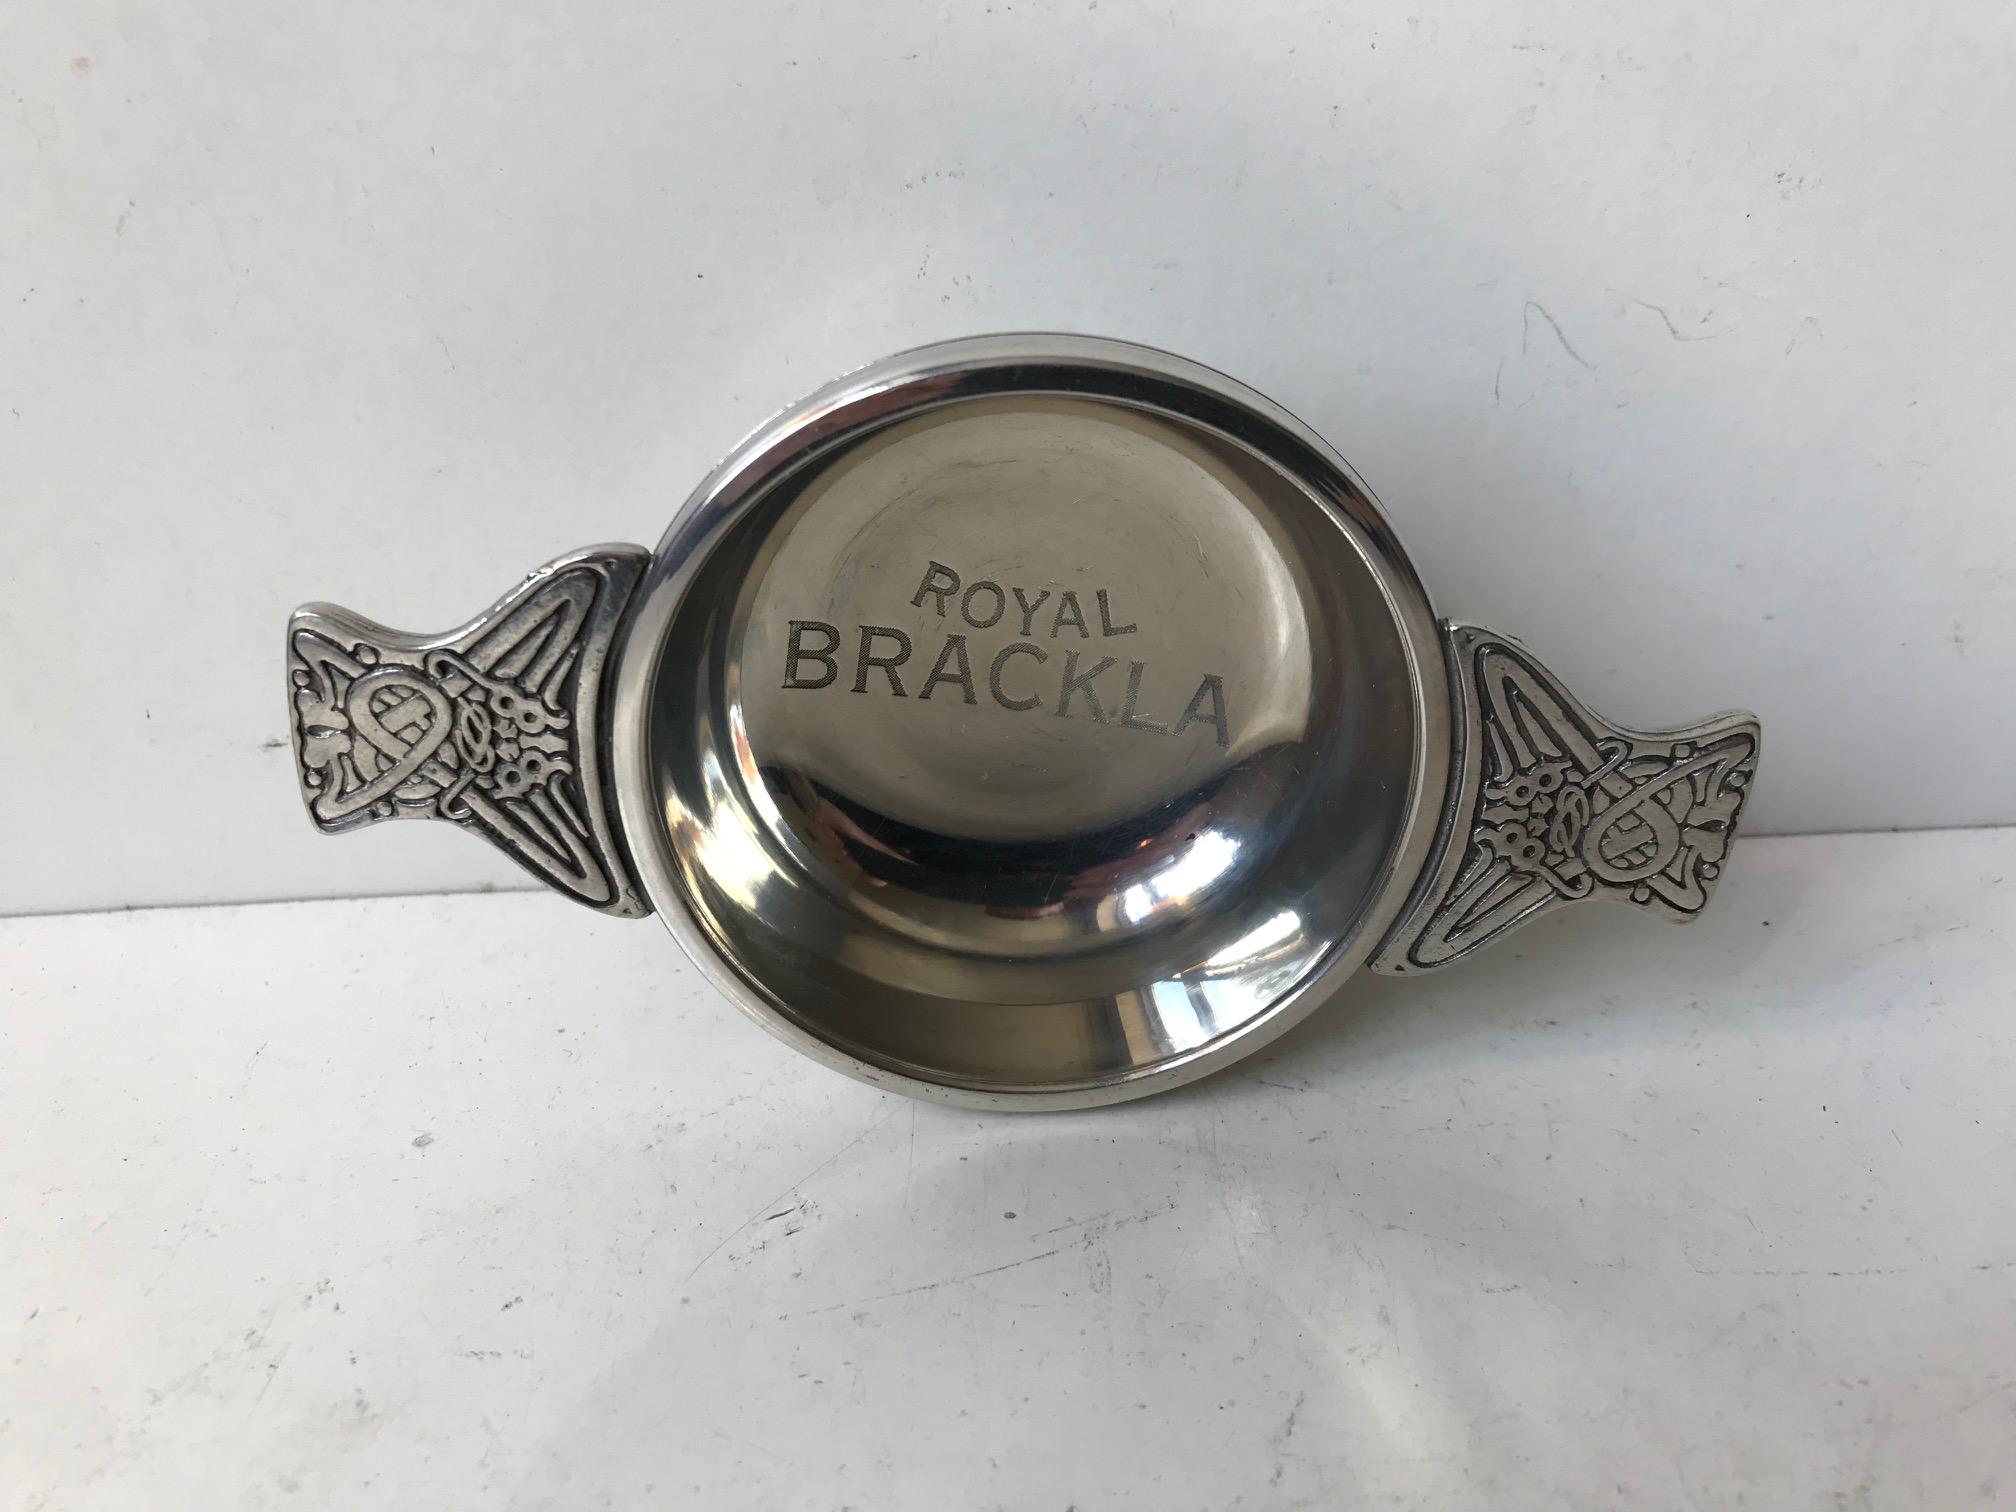 Royal Brackla makes some of the finest single malt whiskey in the world. This tasting vessel called a quaich is made from polished pewter and features handles with Celtic ornaments. In Scotland a quaich given as a gift symbolized friendship and